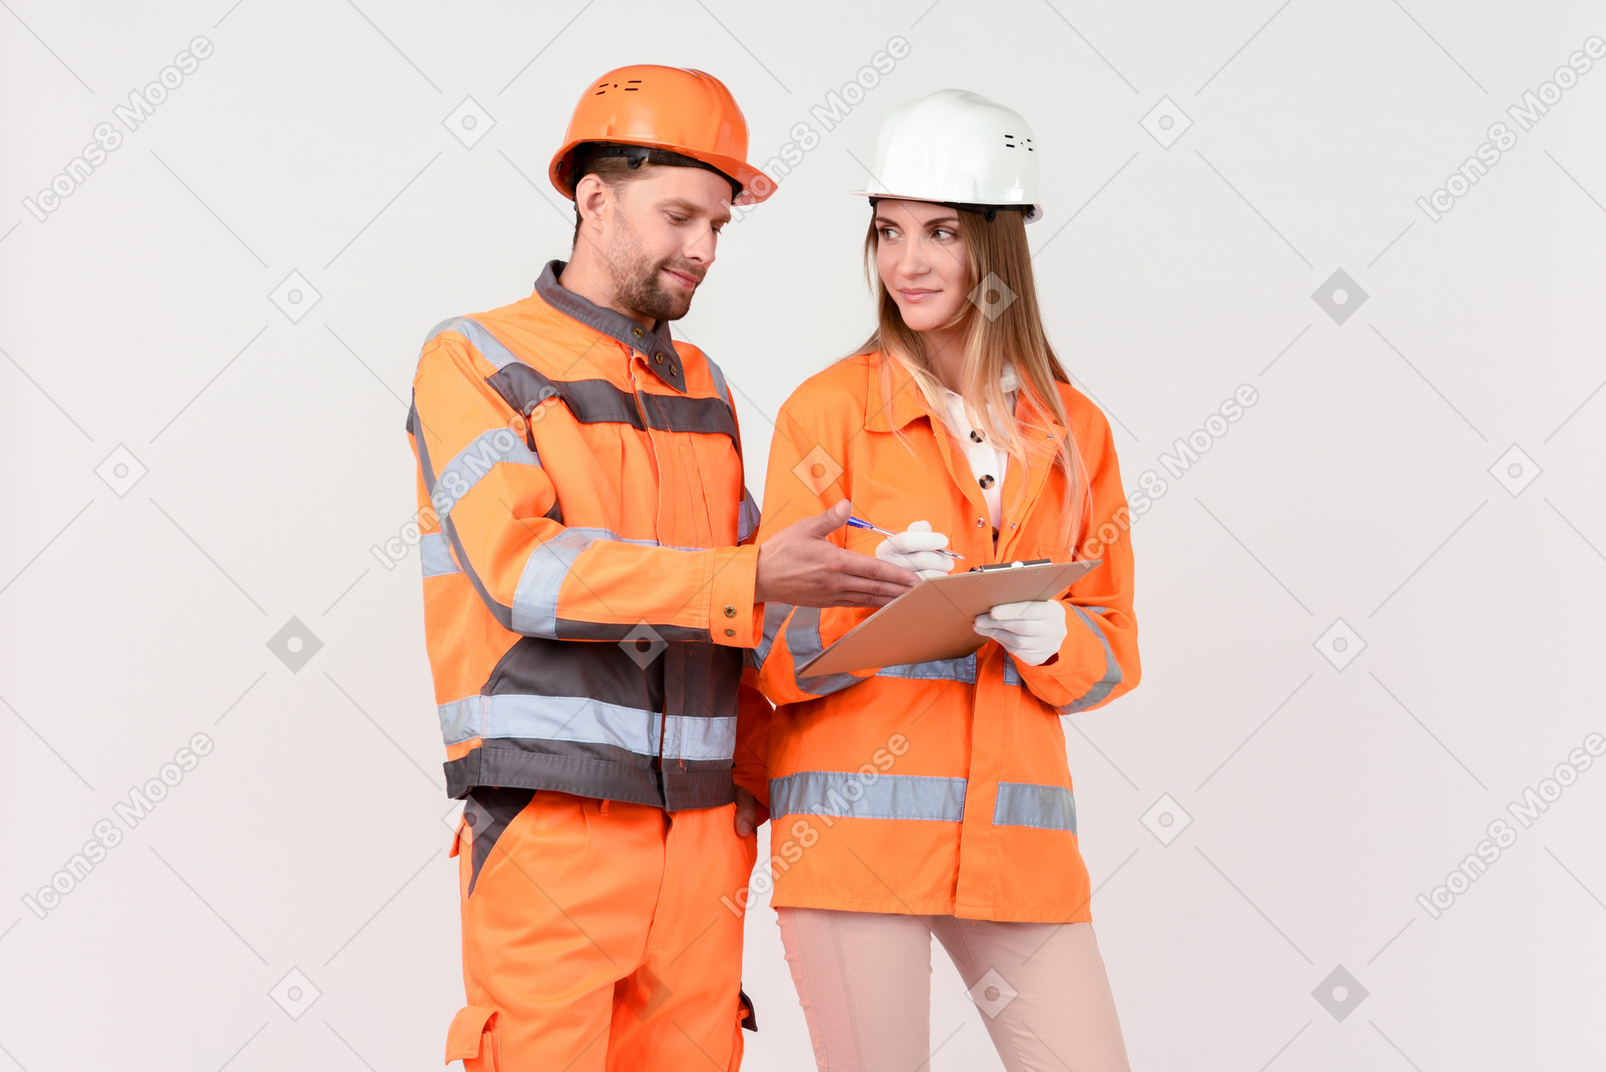 Male and female workers discussing something